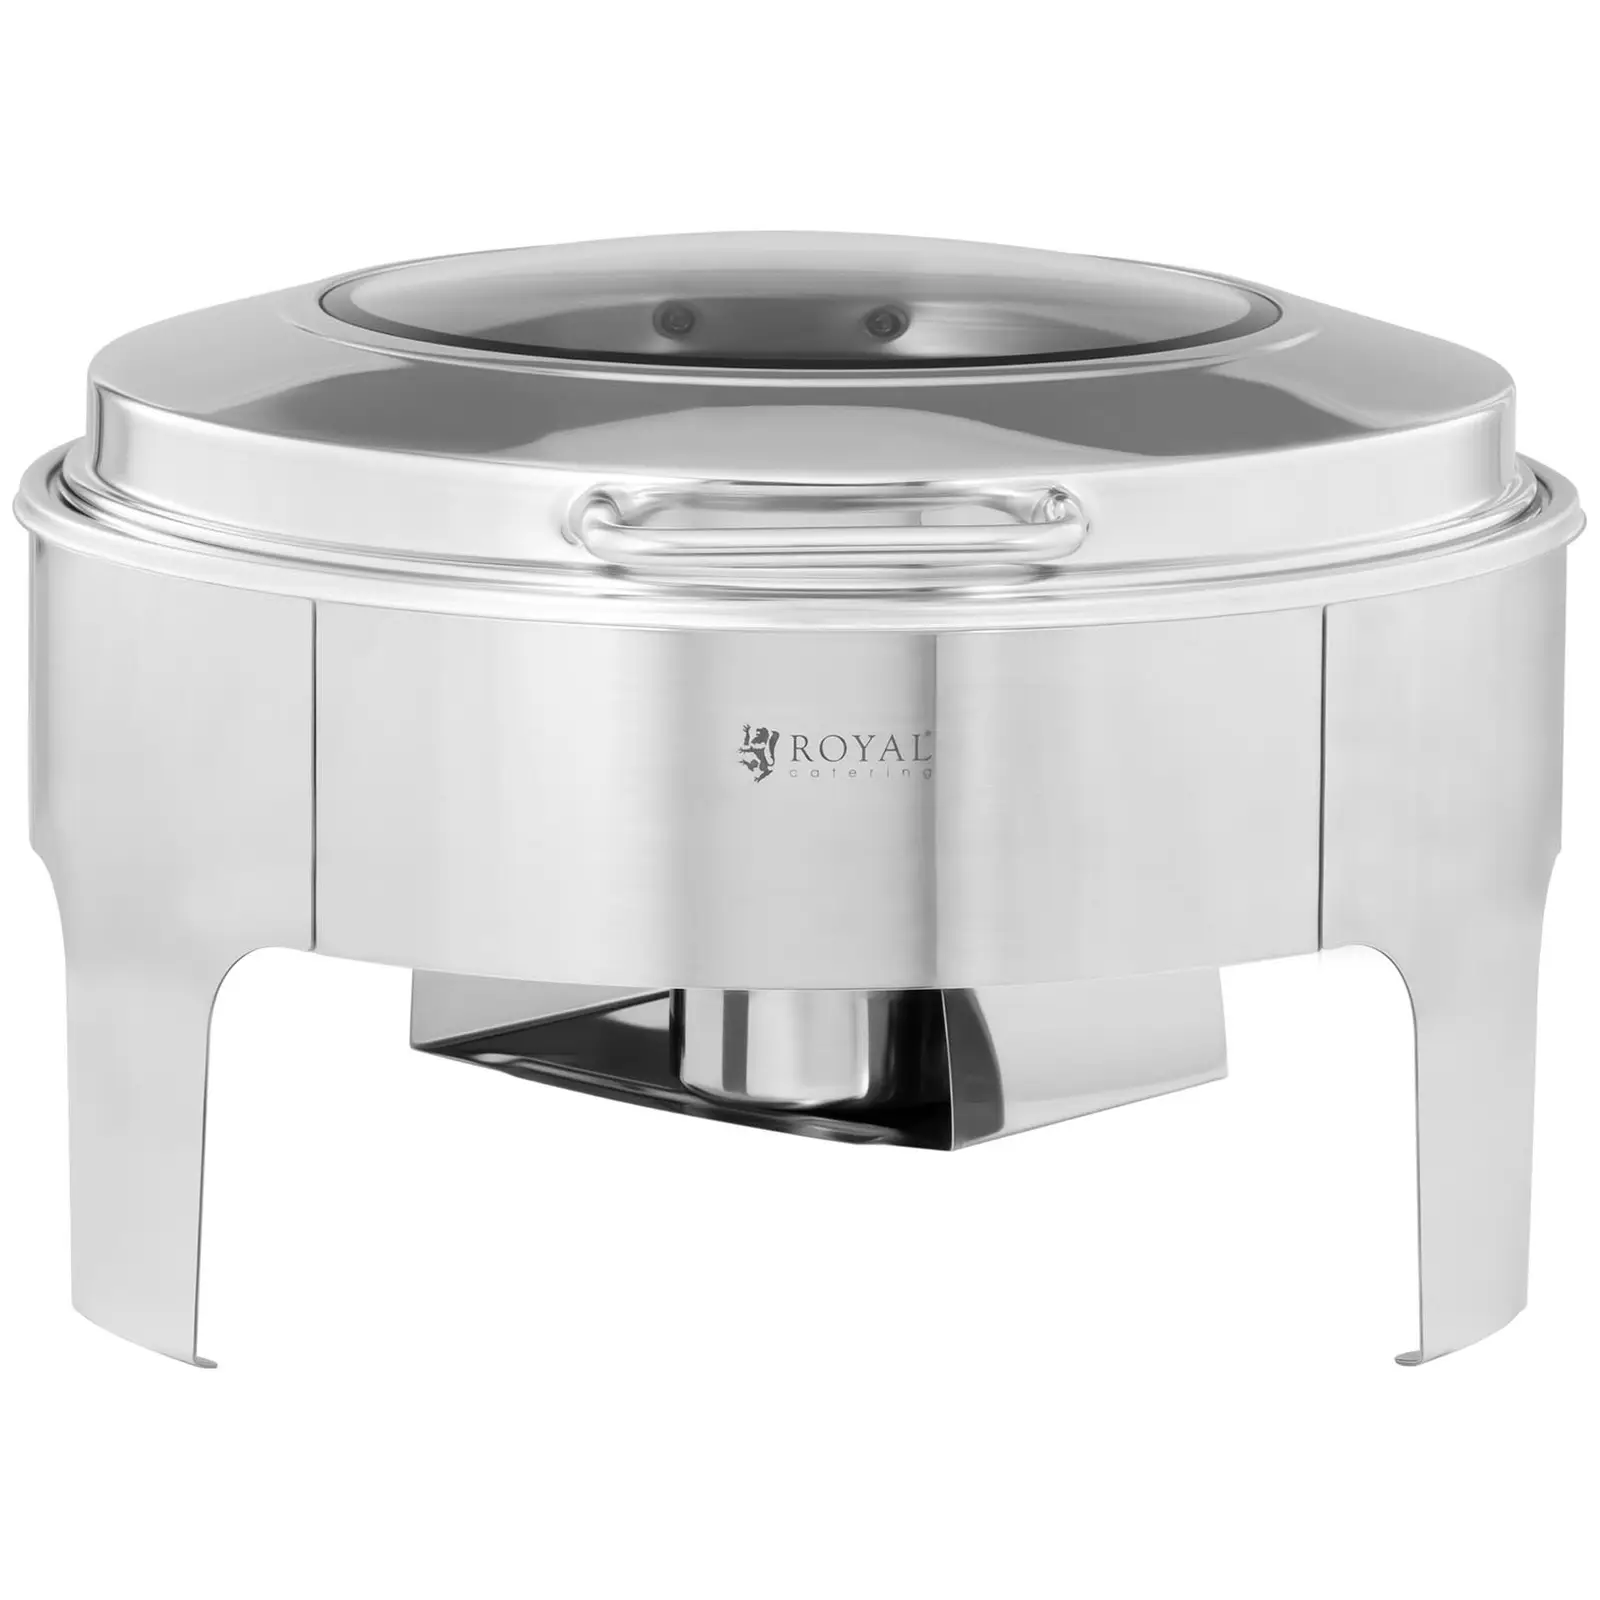 Chafing Dish - round - Royal Catering - 5.8 L - 1 fuel cell - viewing window